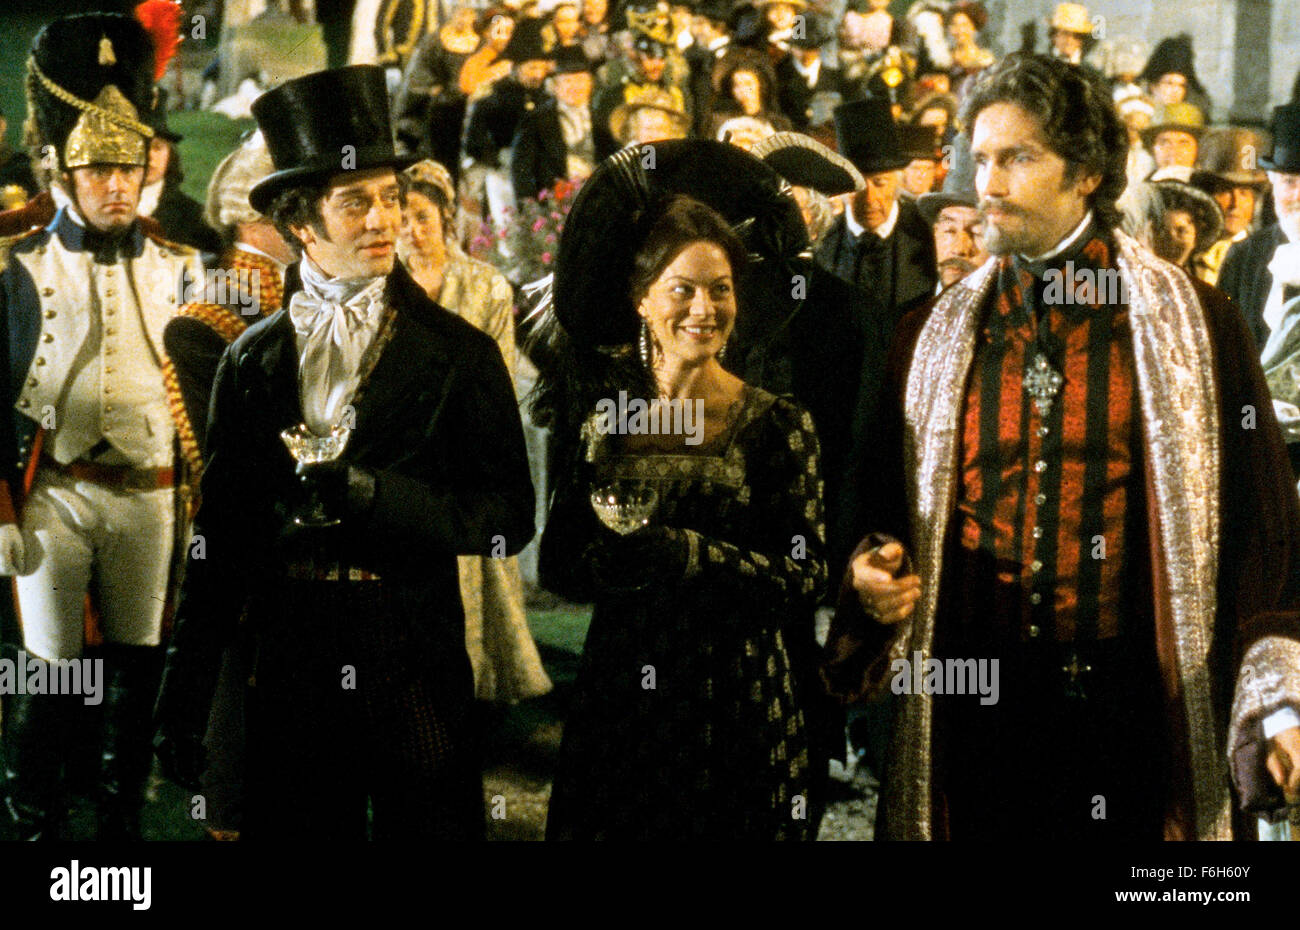 Jan 23, 2002; Dublin, IRELAND; JAMES FRAIN, HELEN McCRORY and JIM CAVIEZEL star as J.F. Villefort, Chief Magistrate, Valentina Villefort, the Chief Magistrate's Wife and Edmond Dantes/Count of Monte Cristo in the thrilling adventure drama 'The Count of Monte Cristo' directed by Kevin Reynolds. Stock Photo